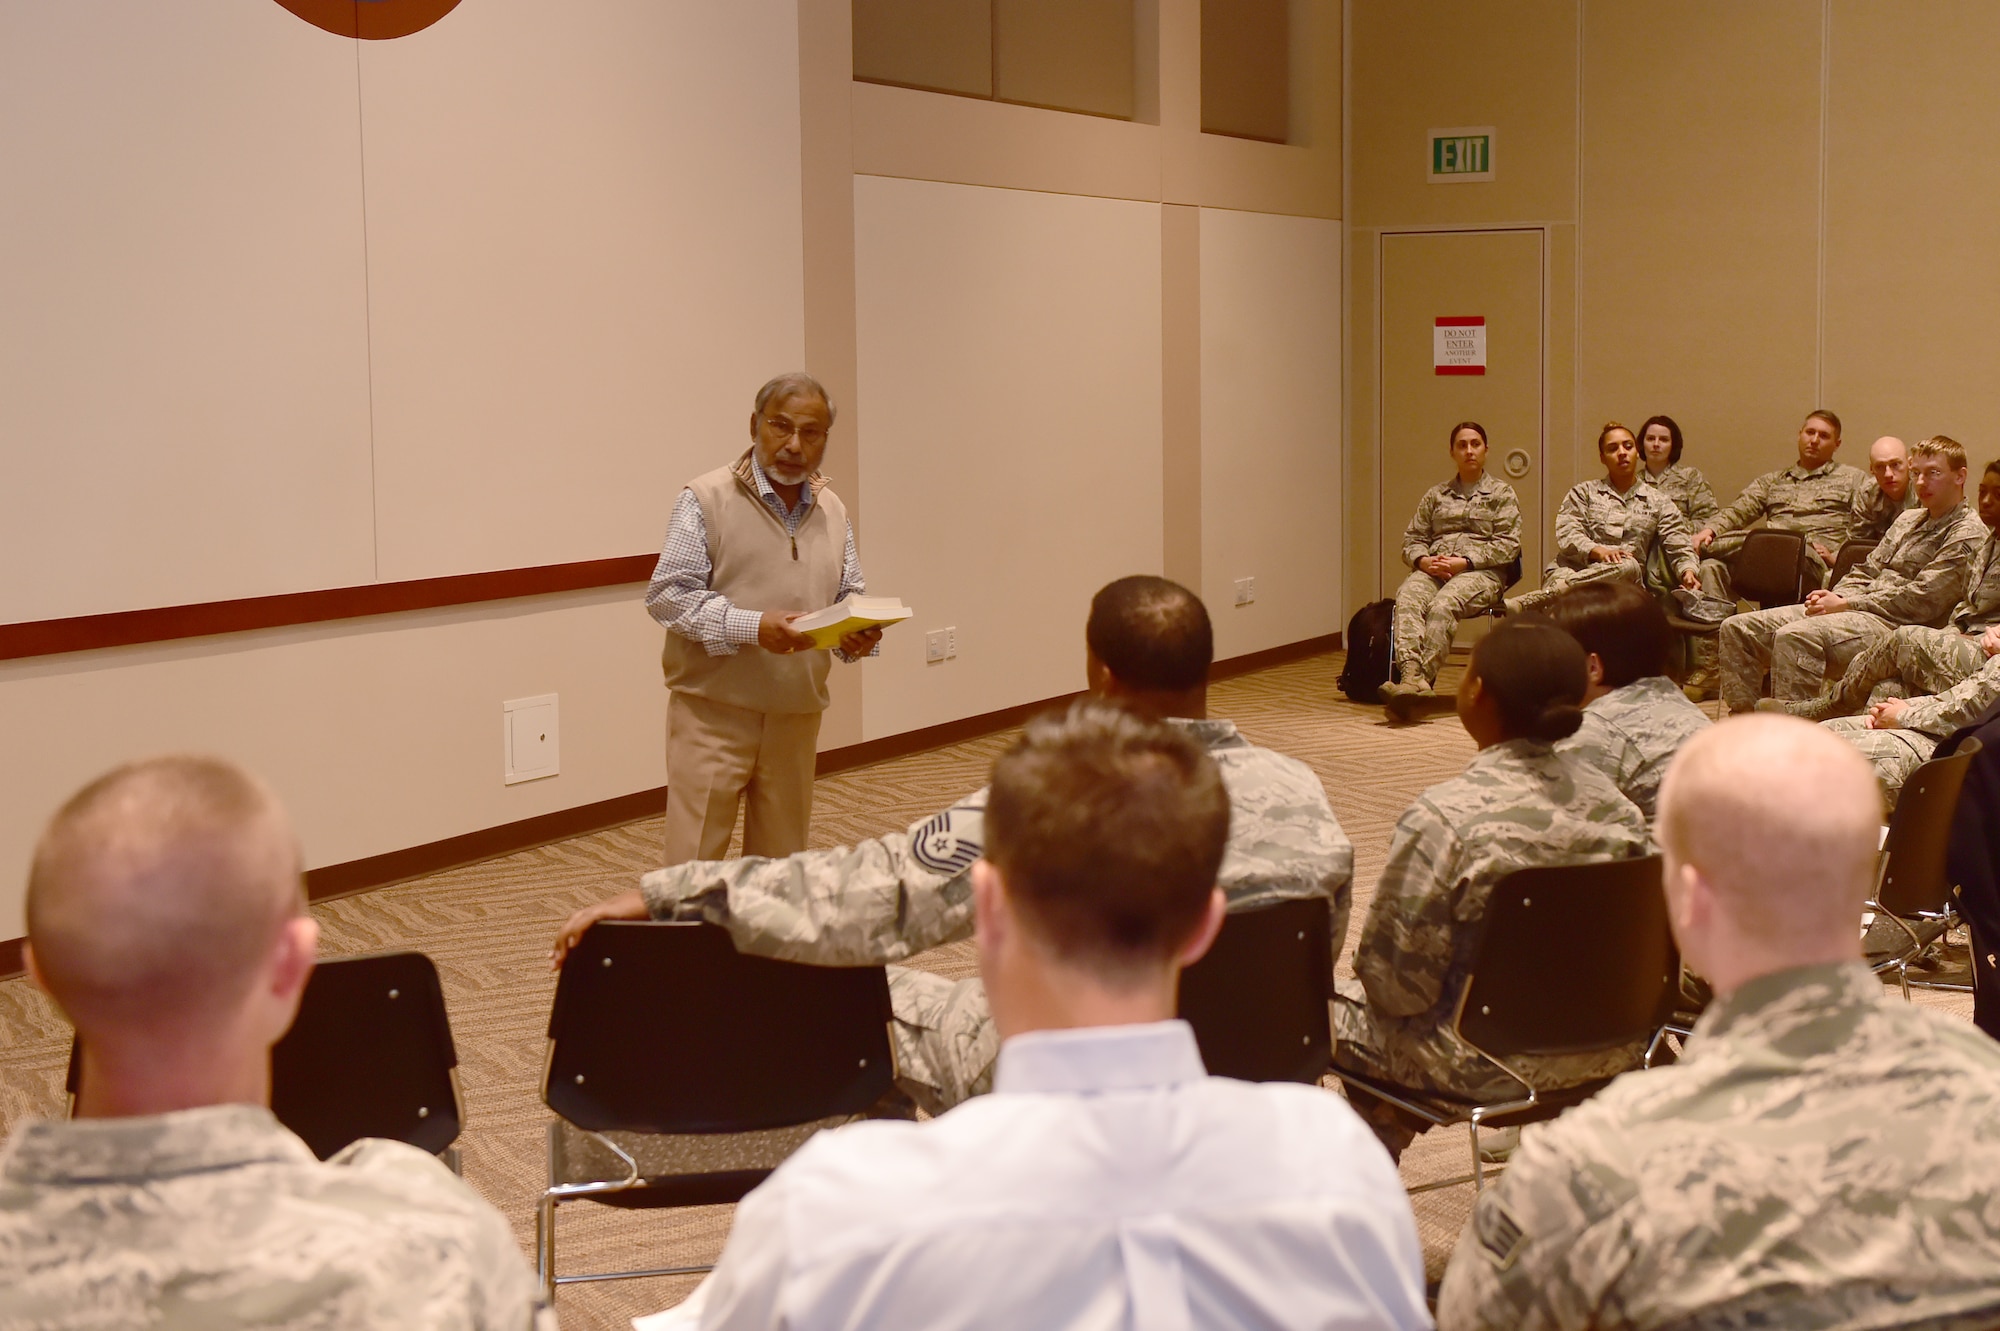 Anant Jain, 460th Space Wing Family Advocacy outreach manager, teaches a course on stress management Nov. 20, 2015, on Buckley Air Force Base, Colo. Airmen took time during Wingman Day to attend classes that taught ways to handle different situations that come up in everyday life. (U.S. Air Force photo by Airman 1st Class Luke W. Nowakowski/Released)